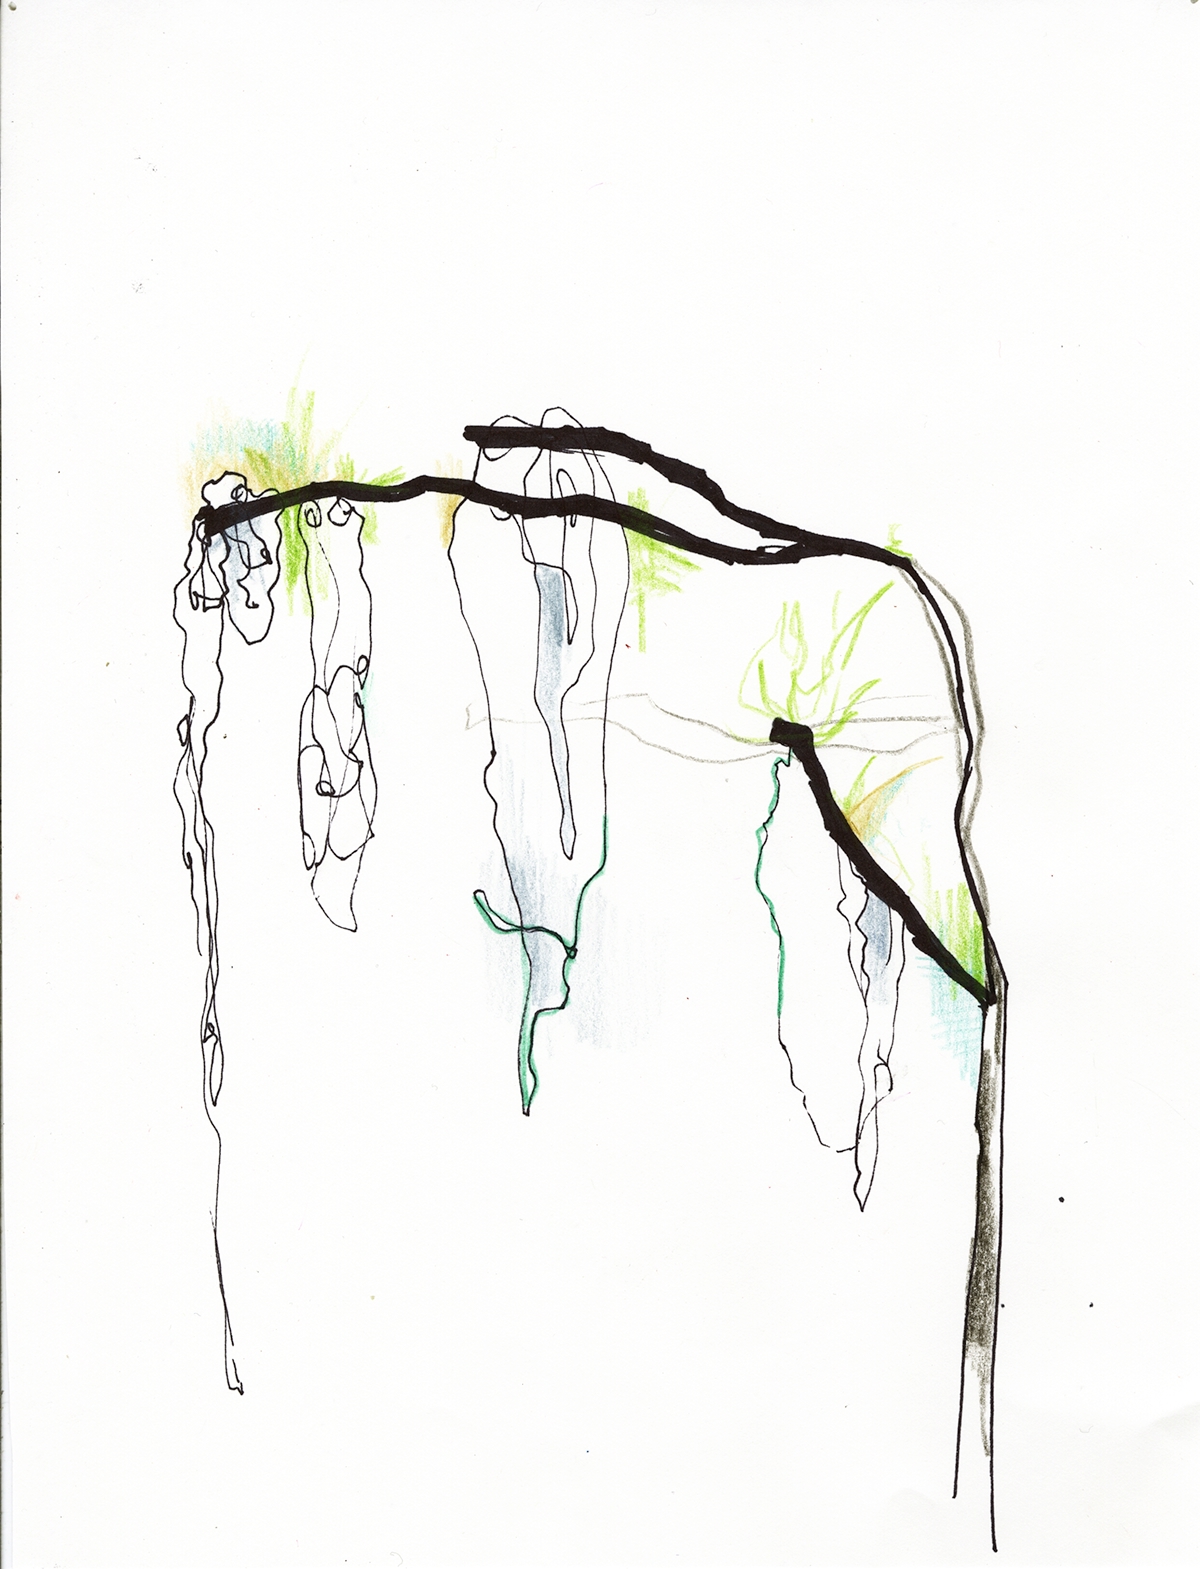 colored pencil graphite pen leaves branches watercolor Nature conservatory plants ink collage